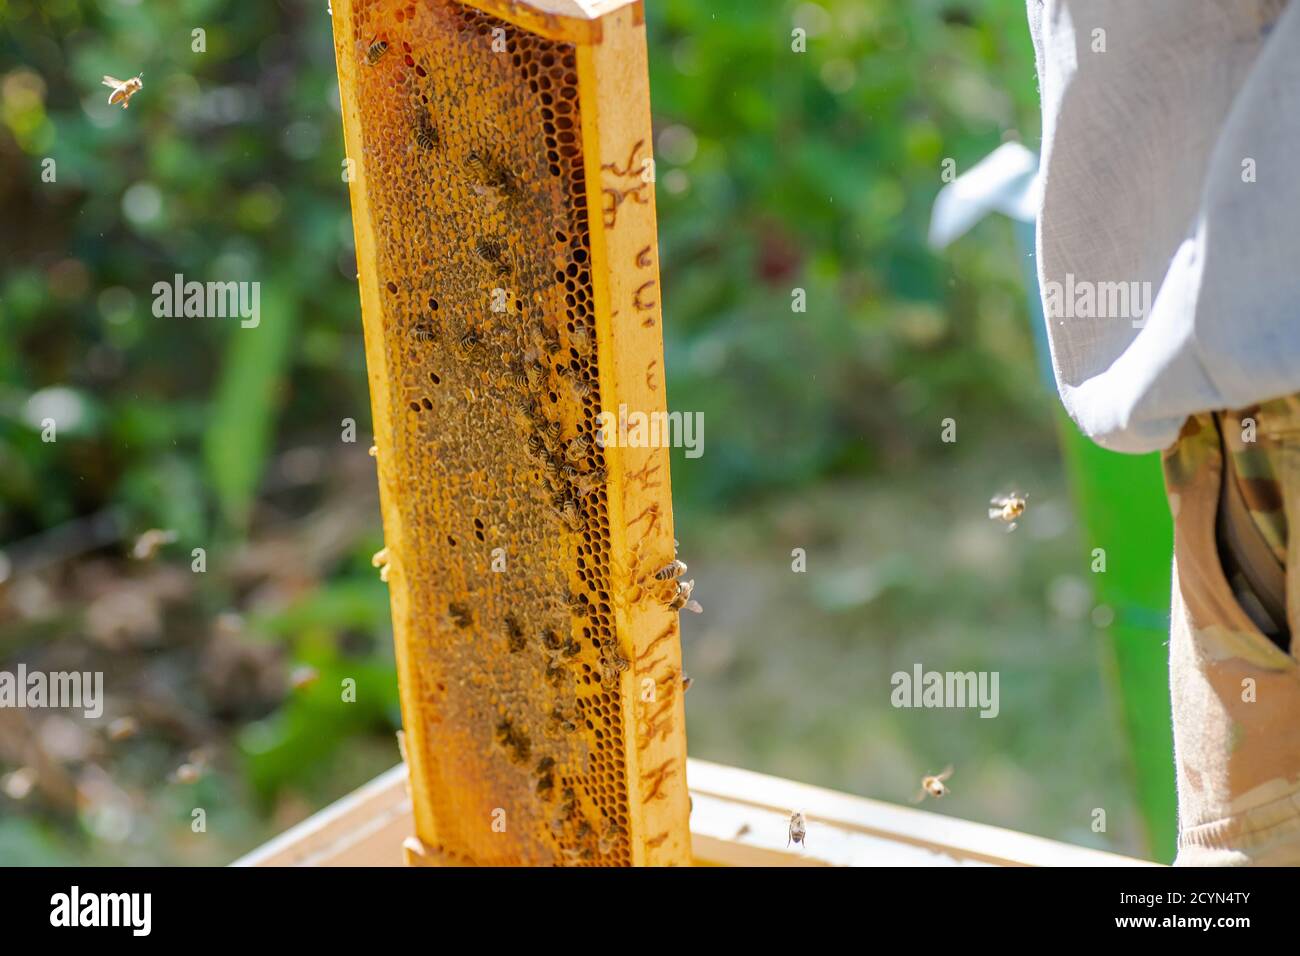 Beekeeper is working with bees and beehives on apiary. Bees on honeycomb. Frames of bee hive. Beekeeping. Honey. Healthy food. Natural products Stock Photo